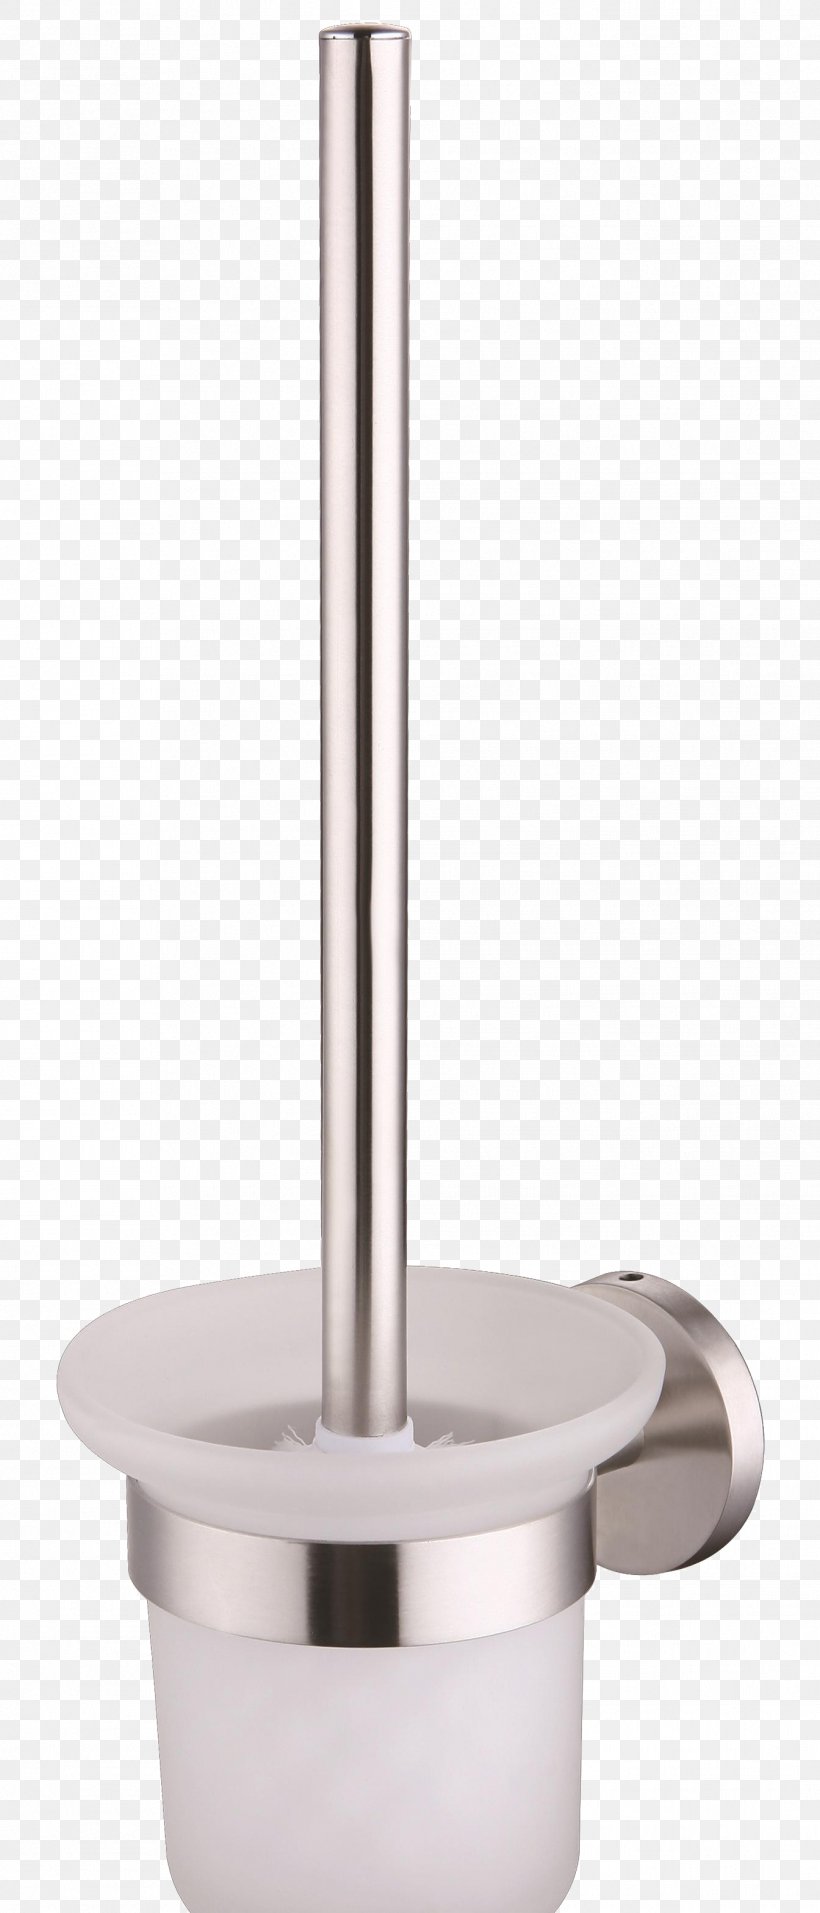 Toilet Brush Bathroom Stainless Steel, PNG, 1344x3136px, Toilet Brush, Bathroom, Bathroom Accessory, Brushed Metal, Flush Toilet Download Free